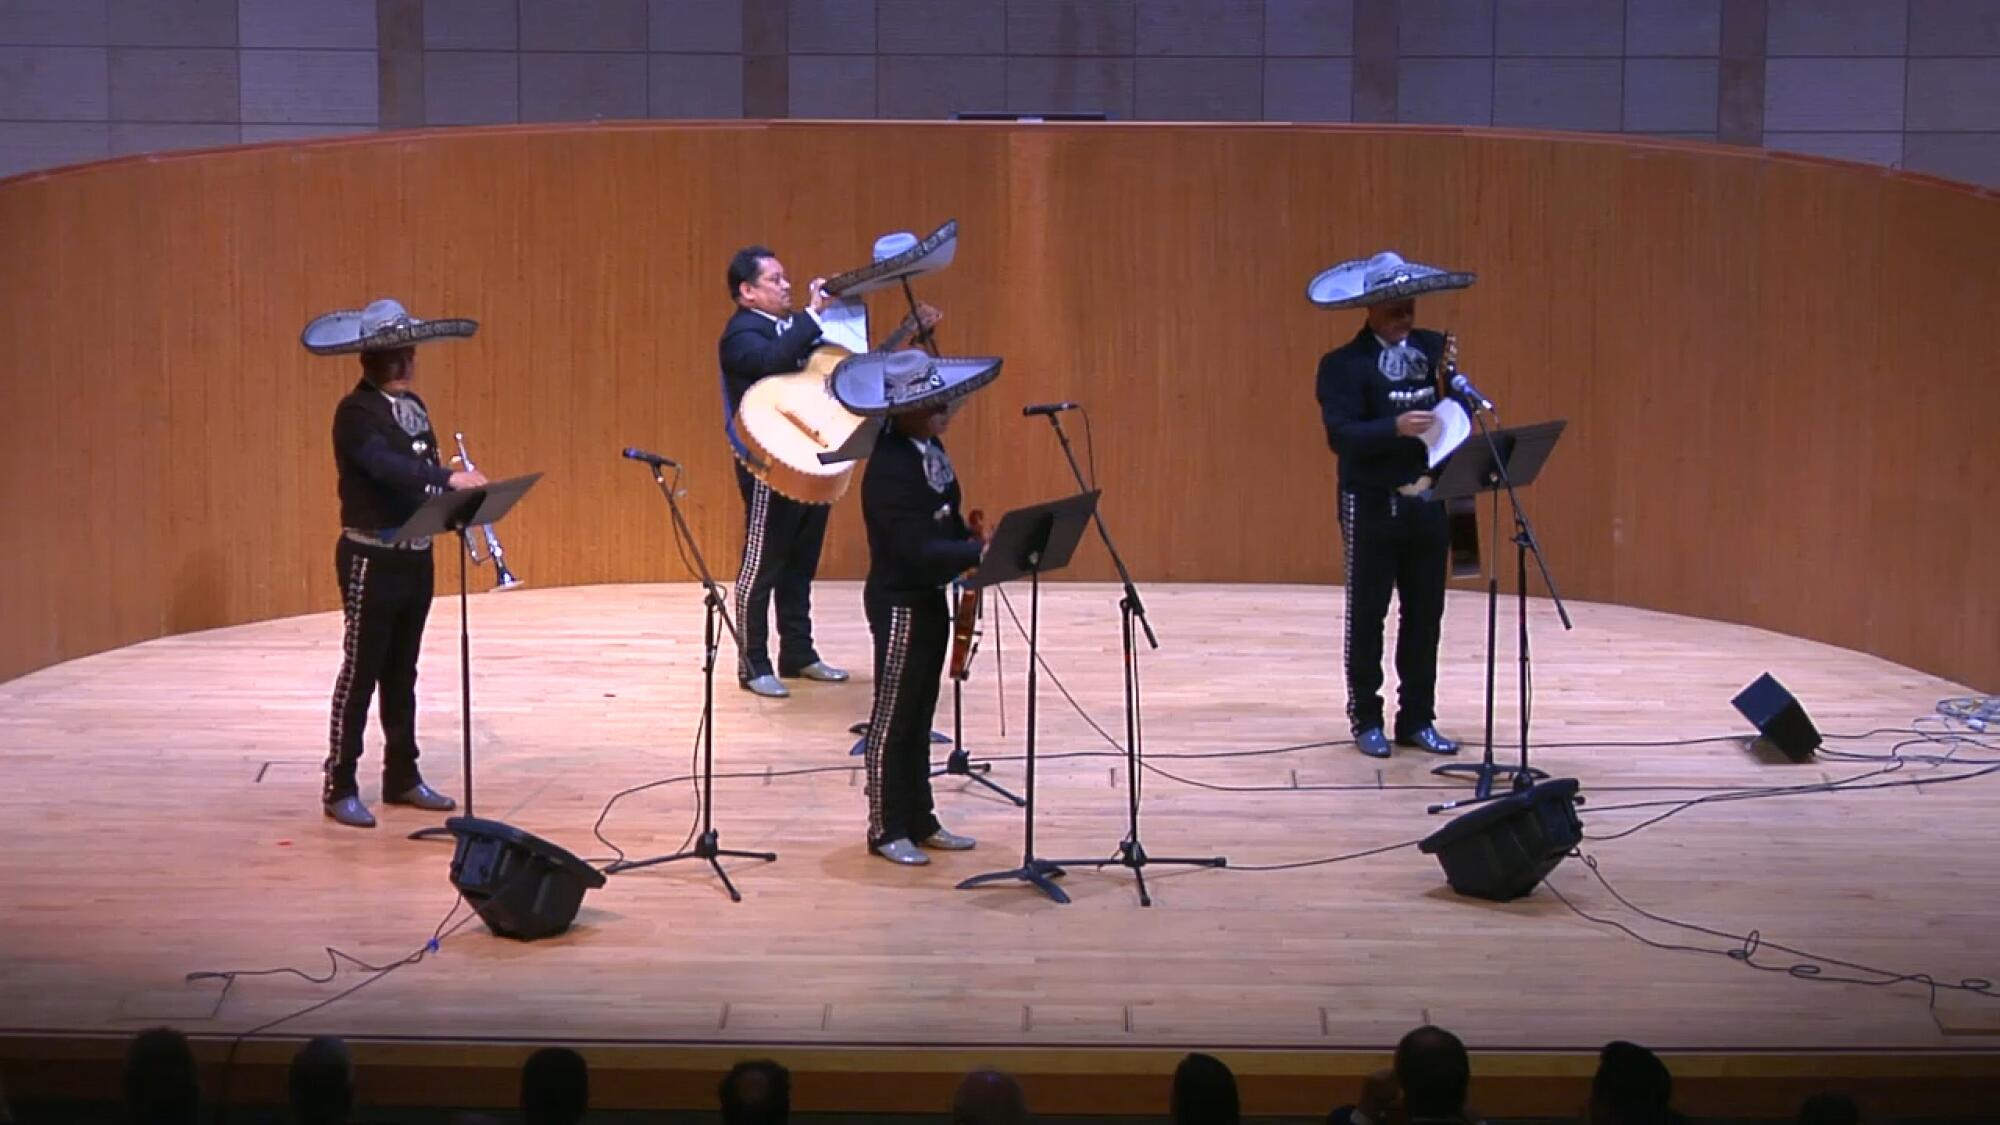 A still from a video shows four performers from a mariachi troupe on stage, one of whom is adjusting his sombrero.